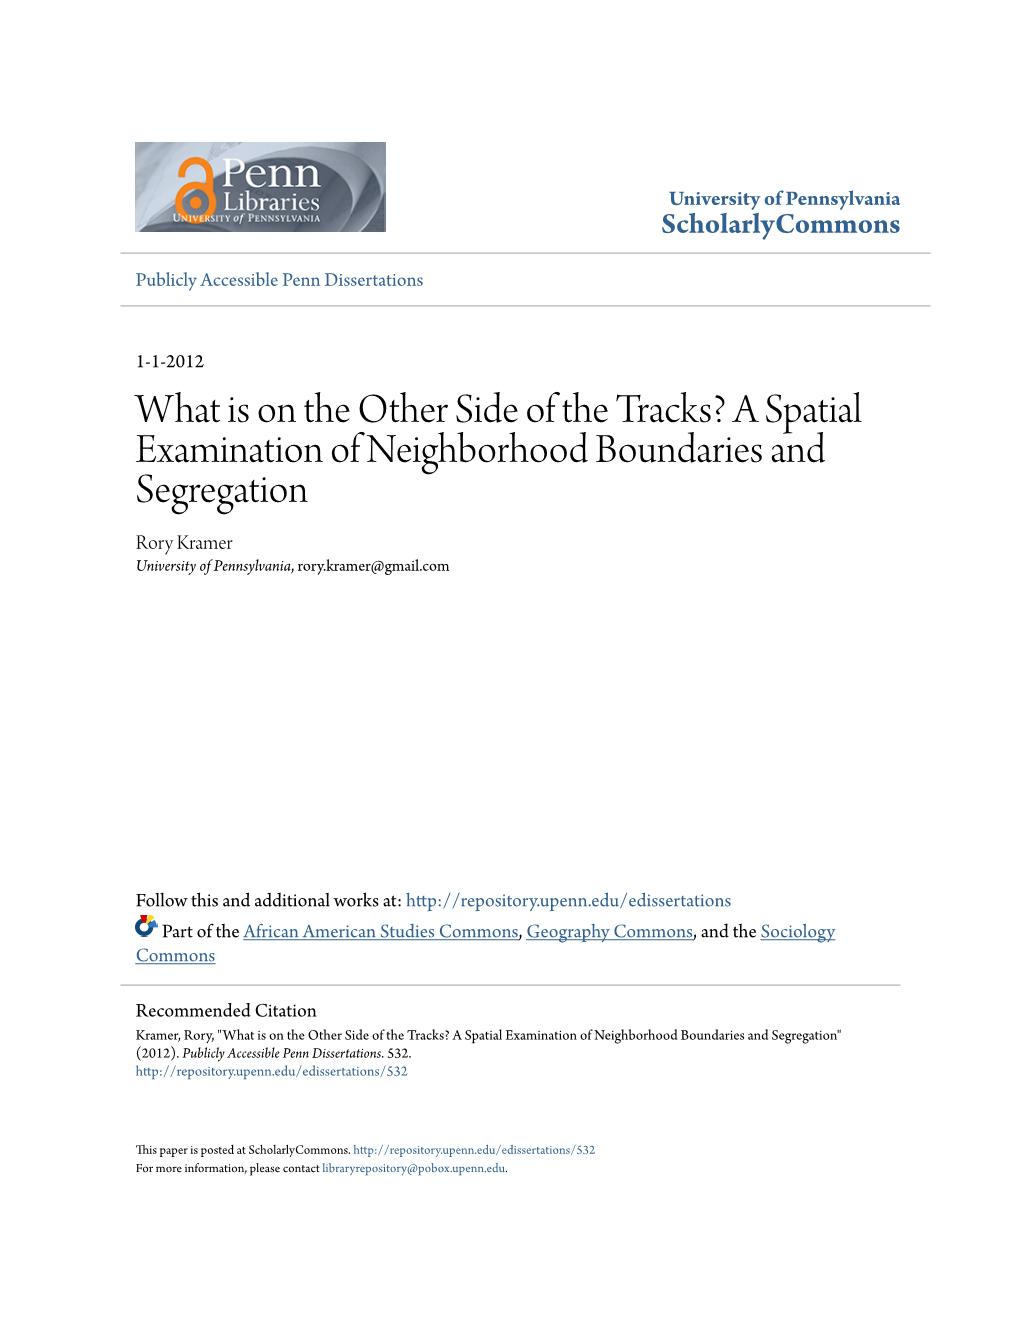 What Is on the Other Side of the Tracks? a Spatial Examination of Neighborhood Boundaries and Segregation